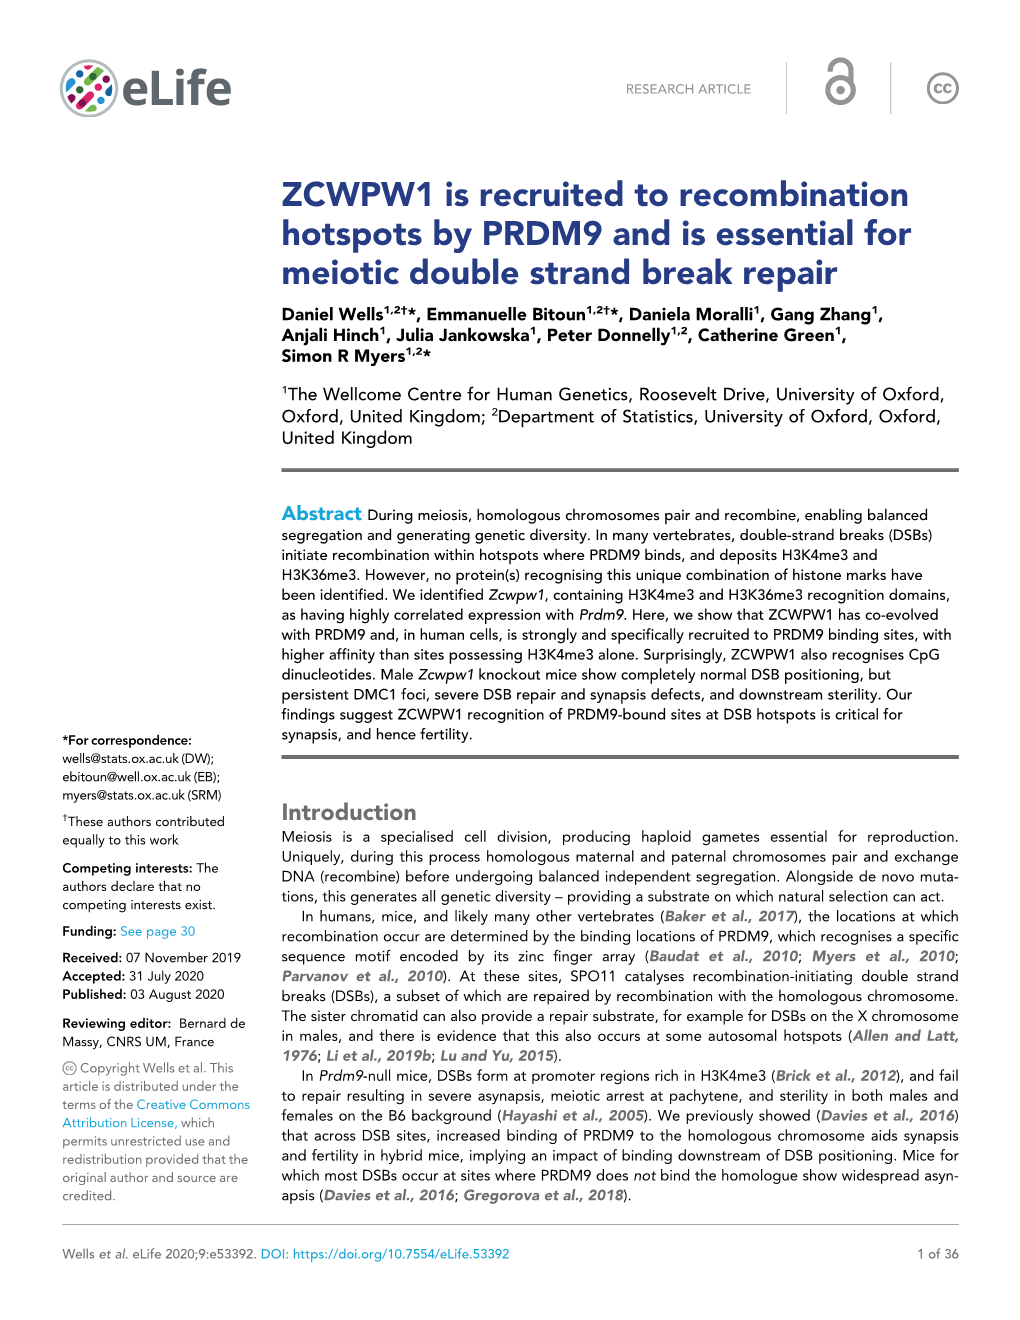 ZCWPW1 Is Recruited to Recombination Hotspots by PRDM9